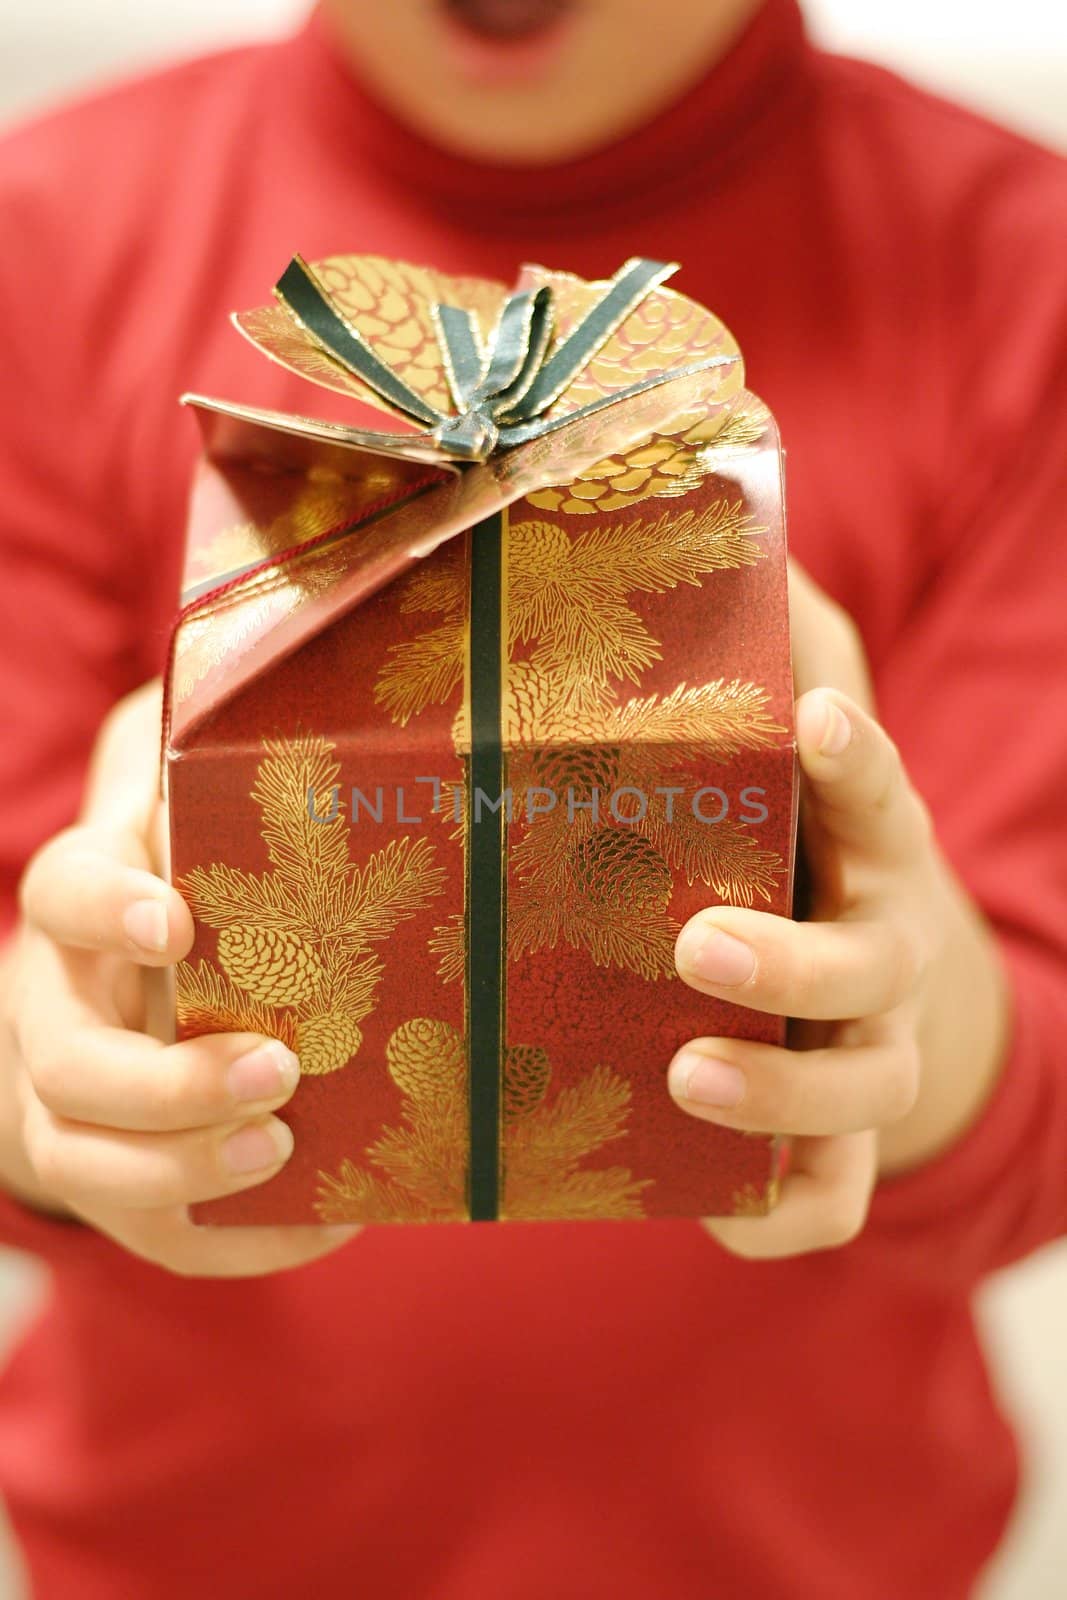 Giving gifts at Christmas.  Focus on the gift